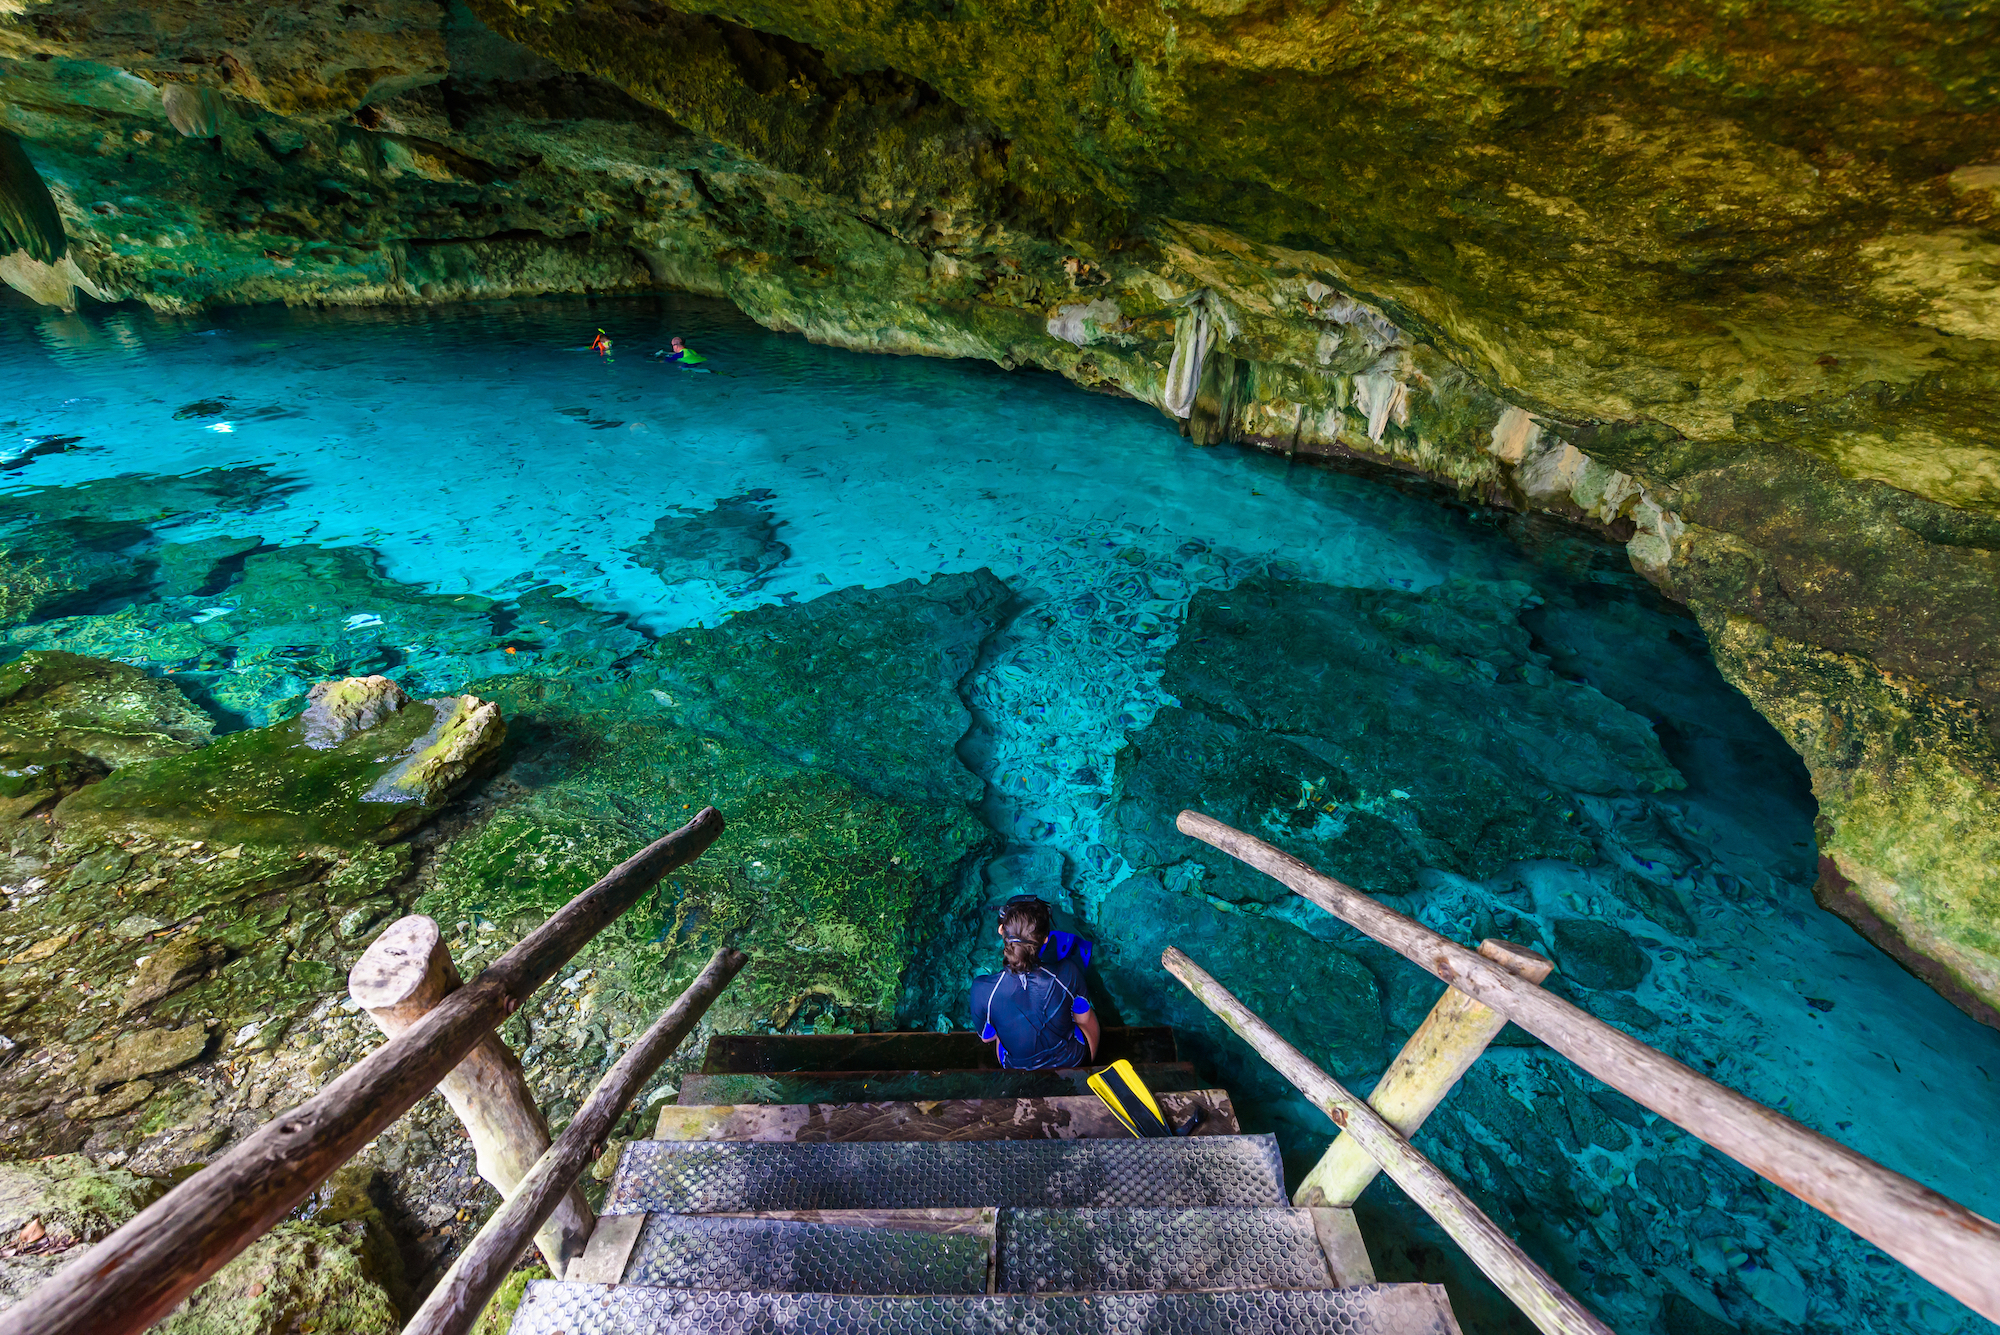 A freediver preparing to enter the Dos Ojos cenote in Mexico, where you can find crystal clear water and breathtaking scenery